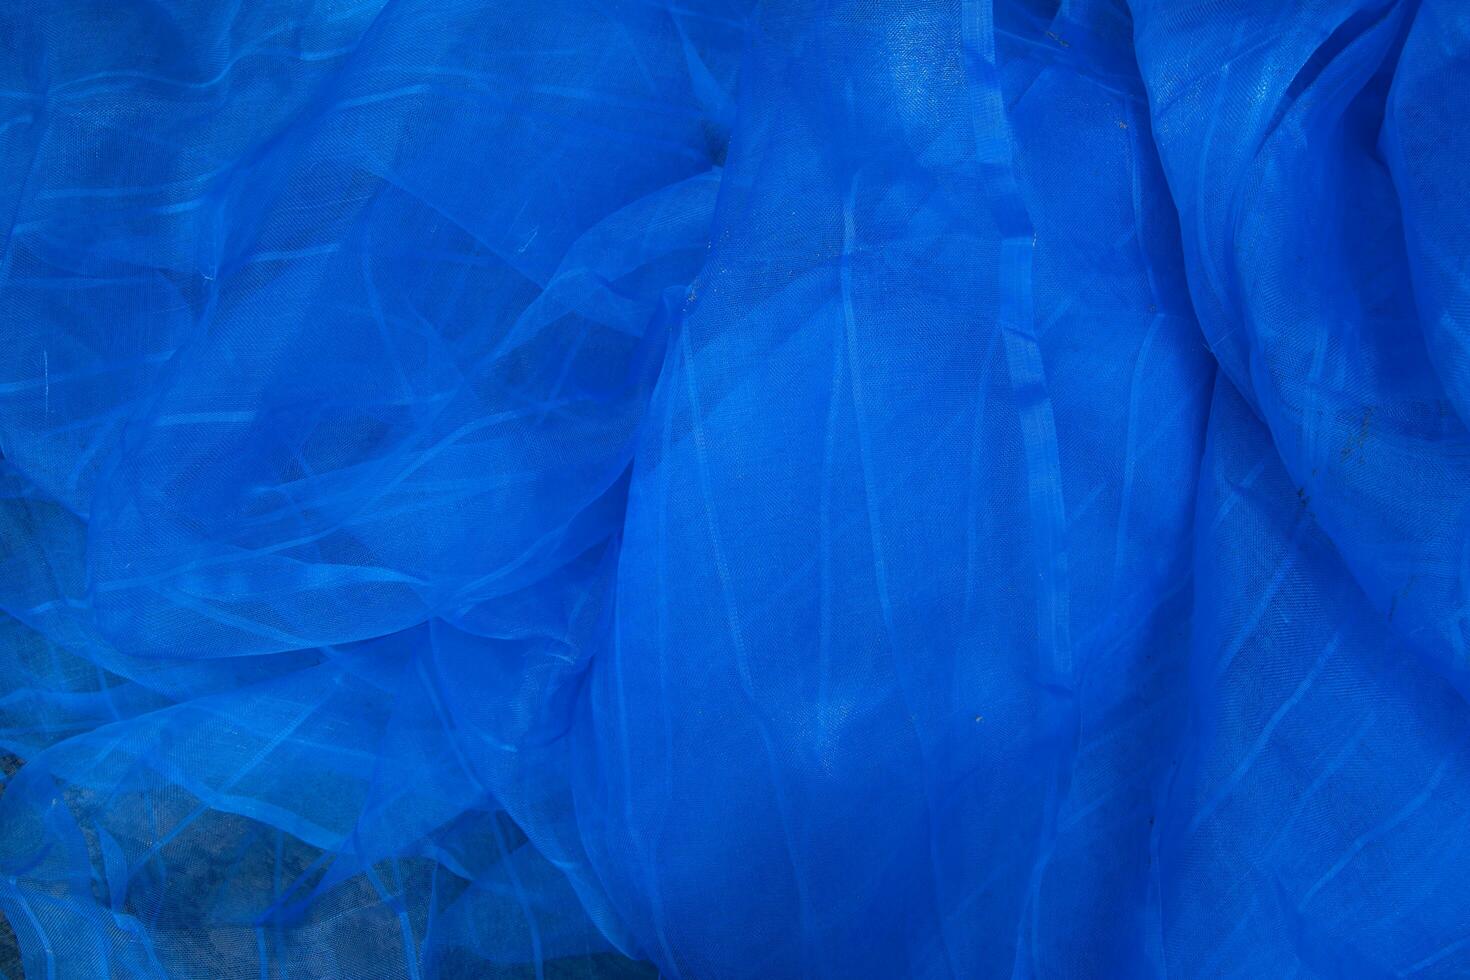 Translucent blue net fabric can be used as a background wallpaper photo